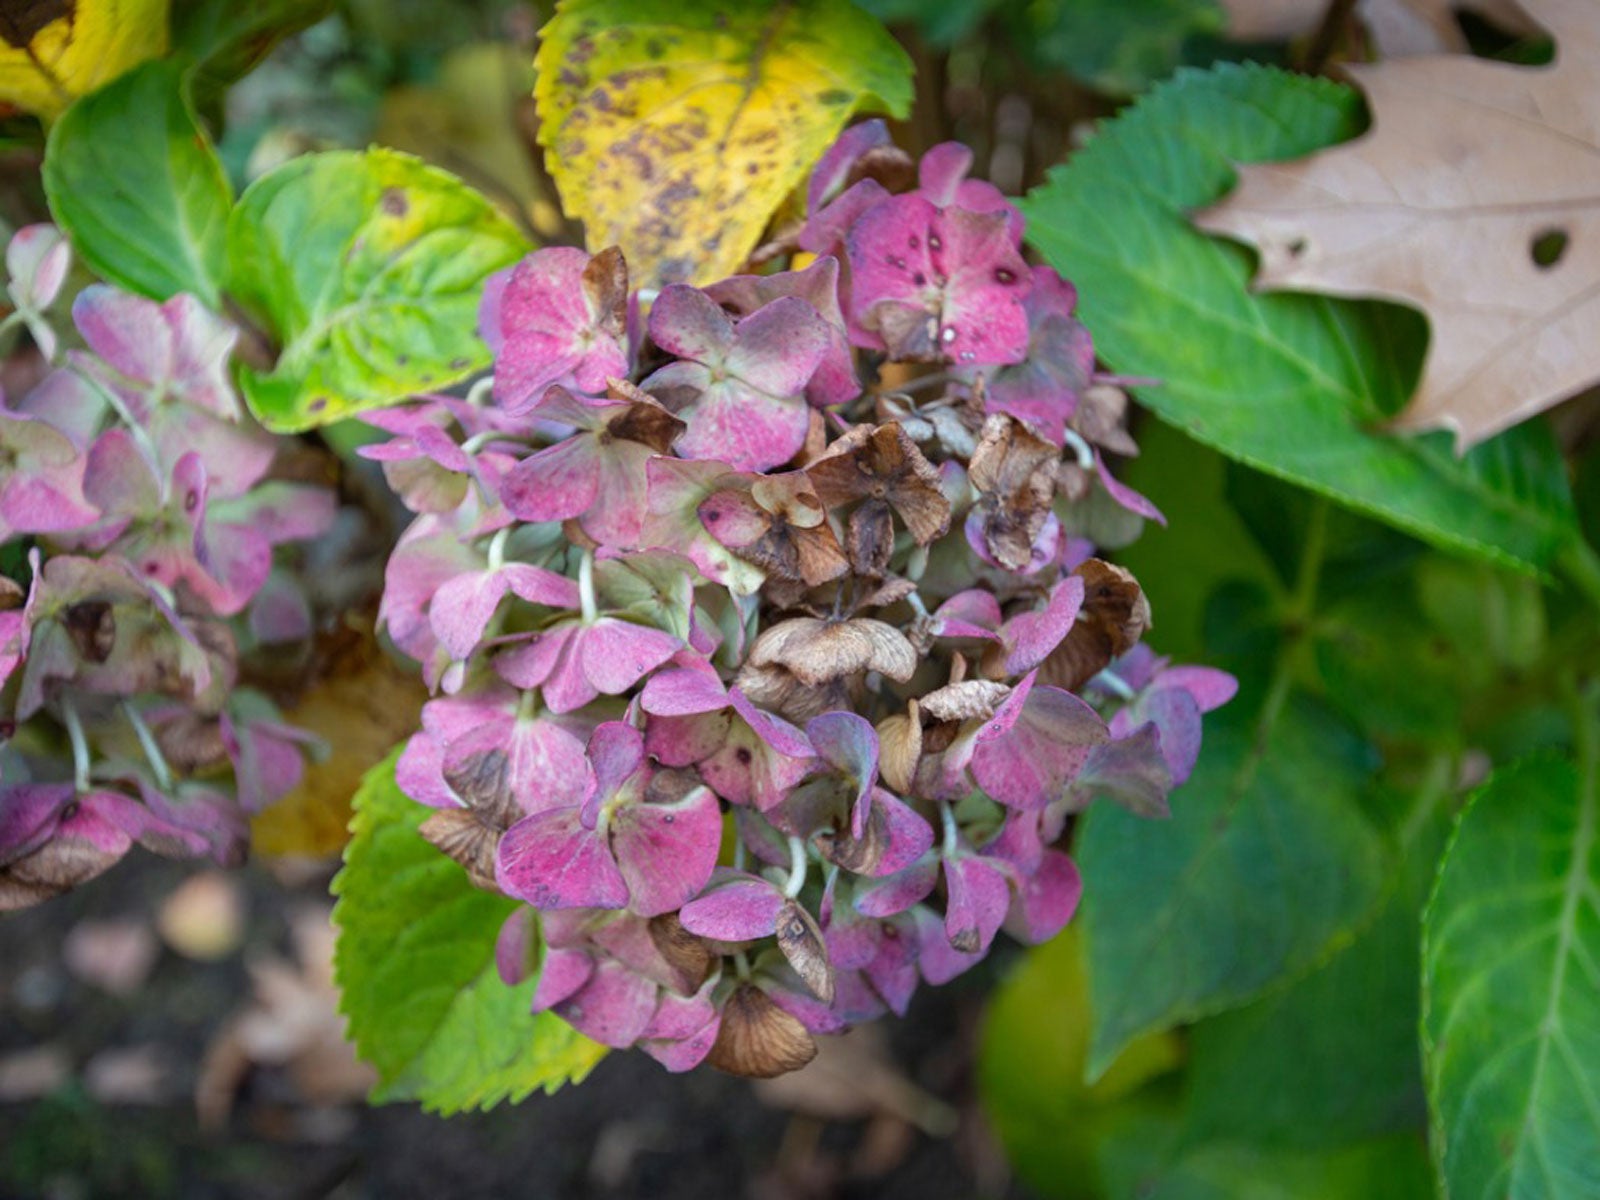 Droopy Hydrangea Plants What To Do When Hydrangeas Are Drooping,How To Soundproof A Room